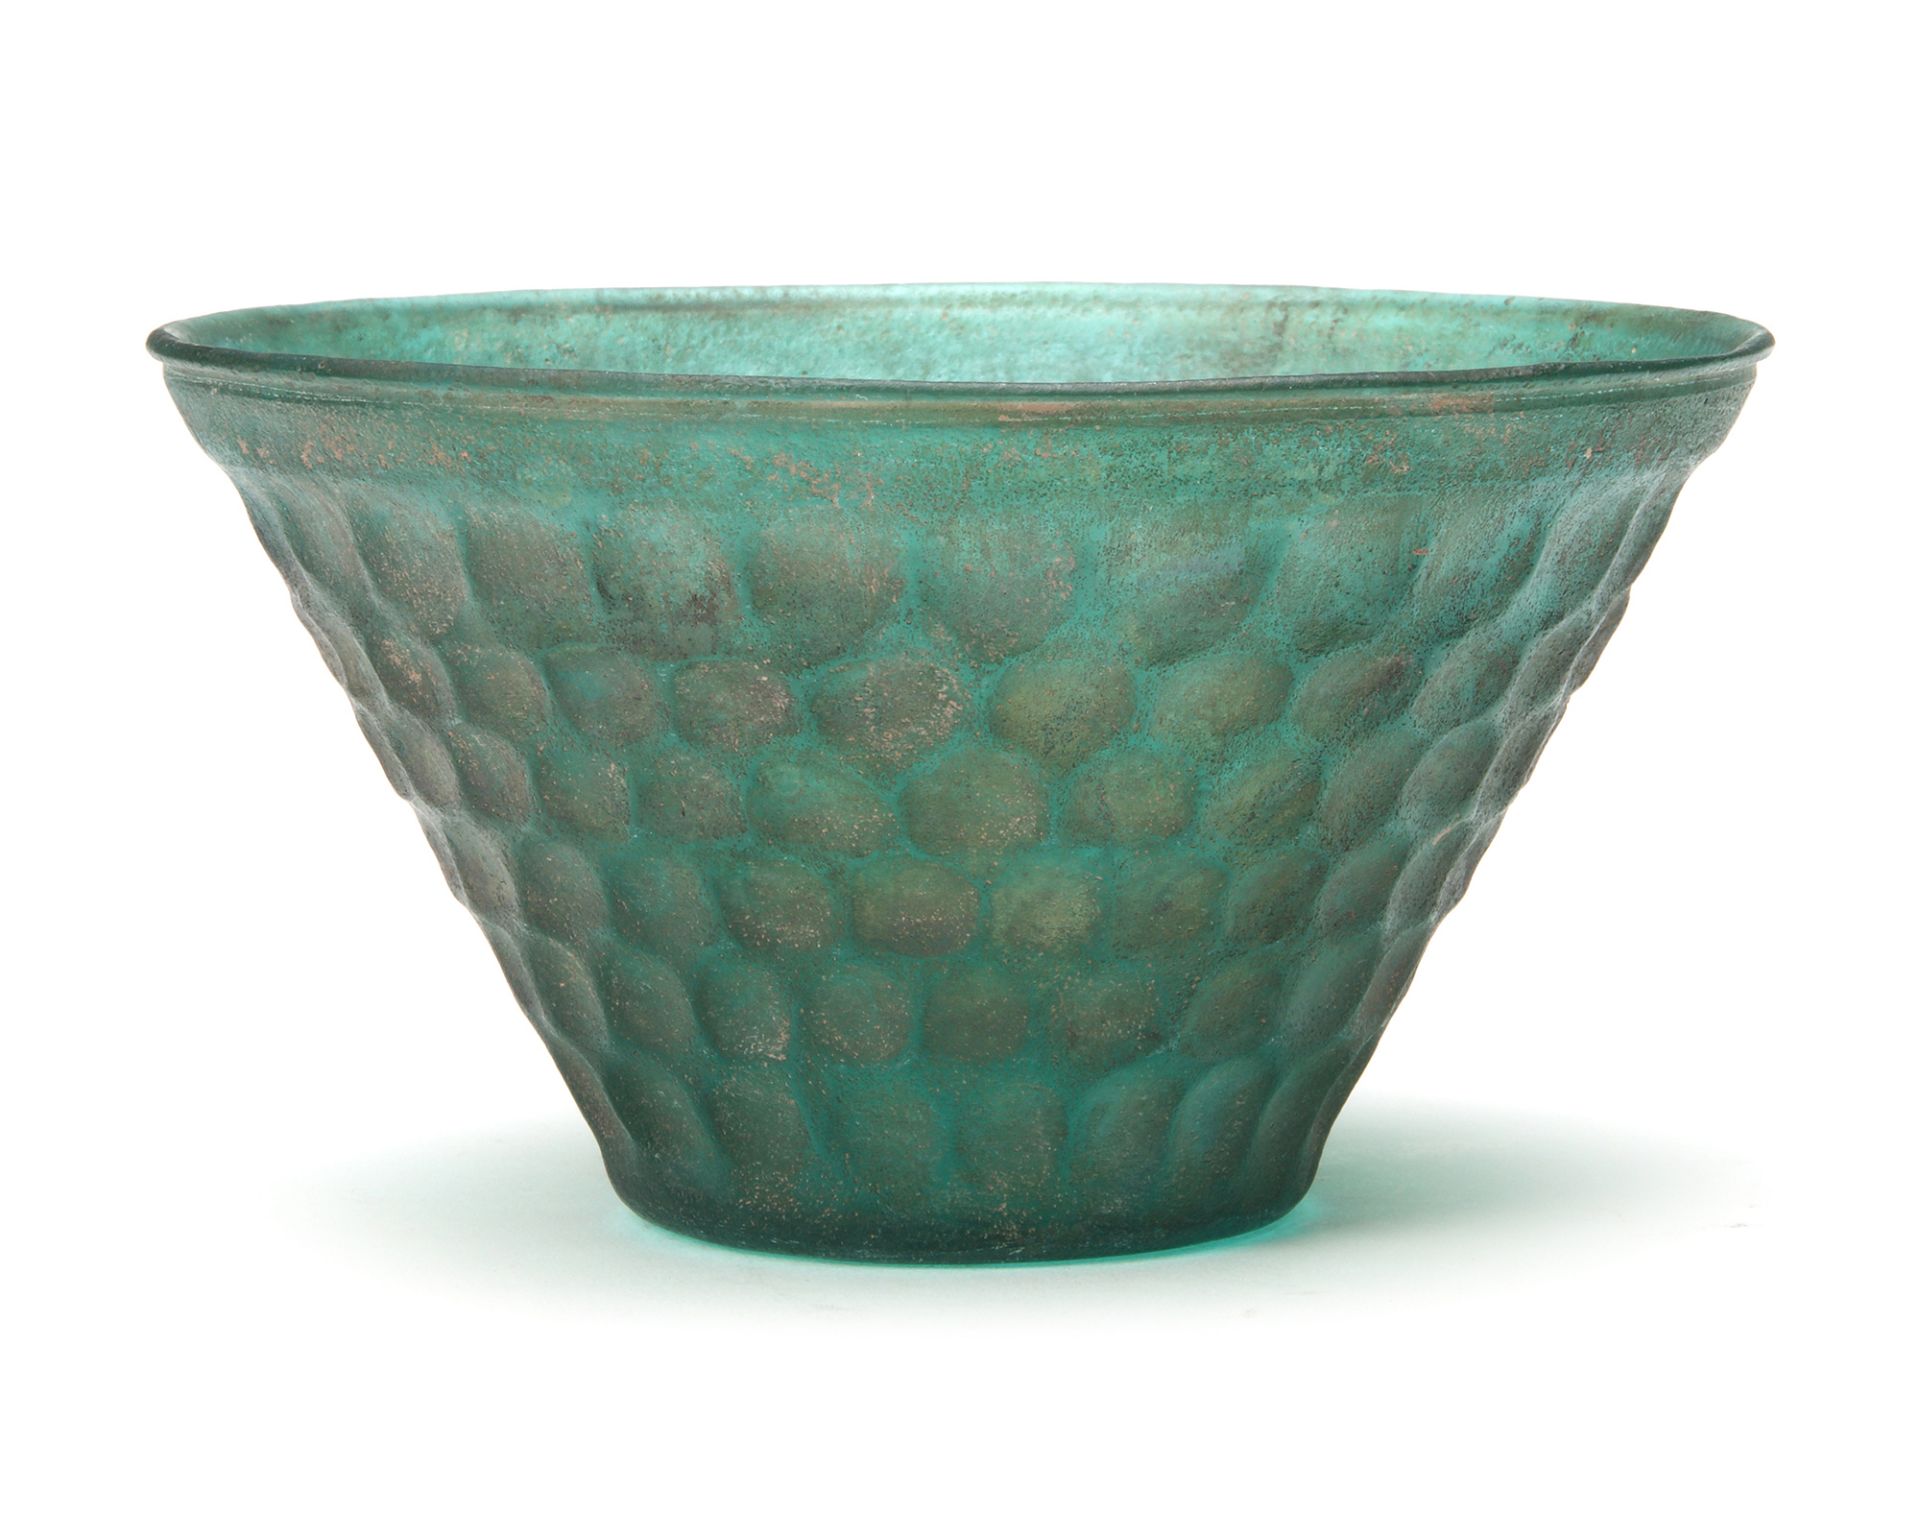 A PERSIAN GREEN CUT GLASS BOWL, 8TH-9TH CENTURY - Image 3 of 10